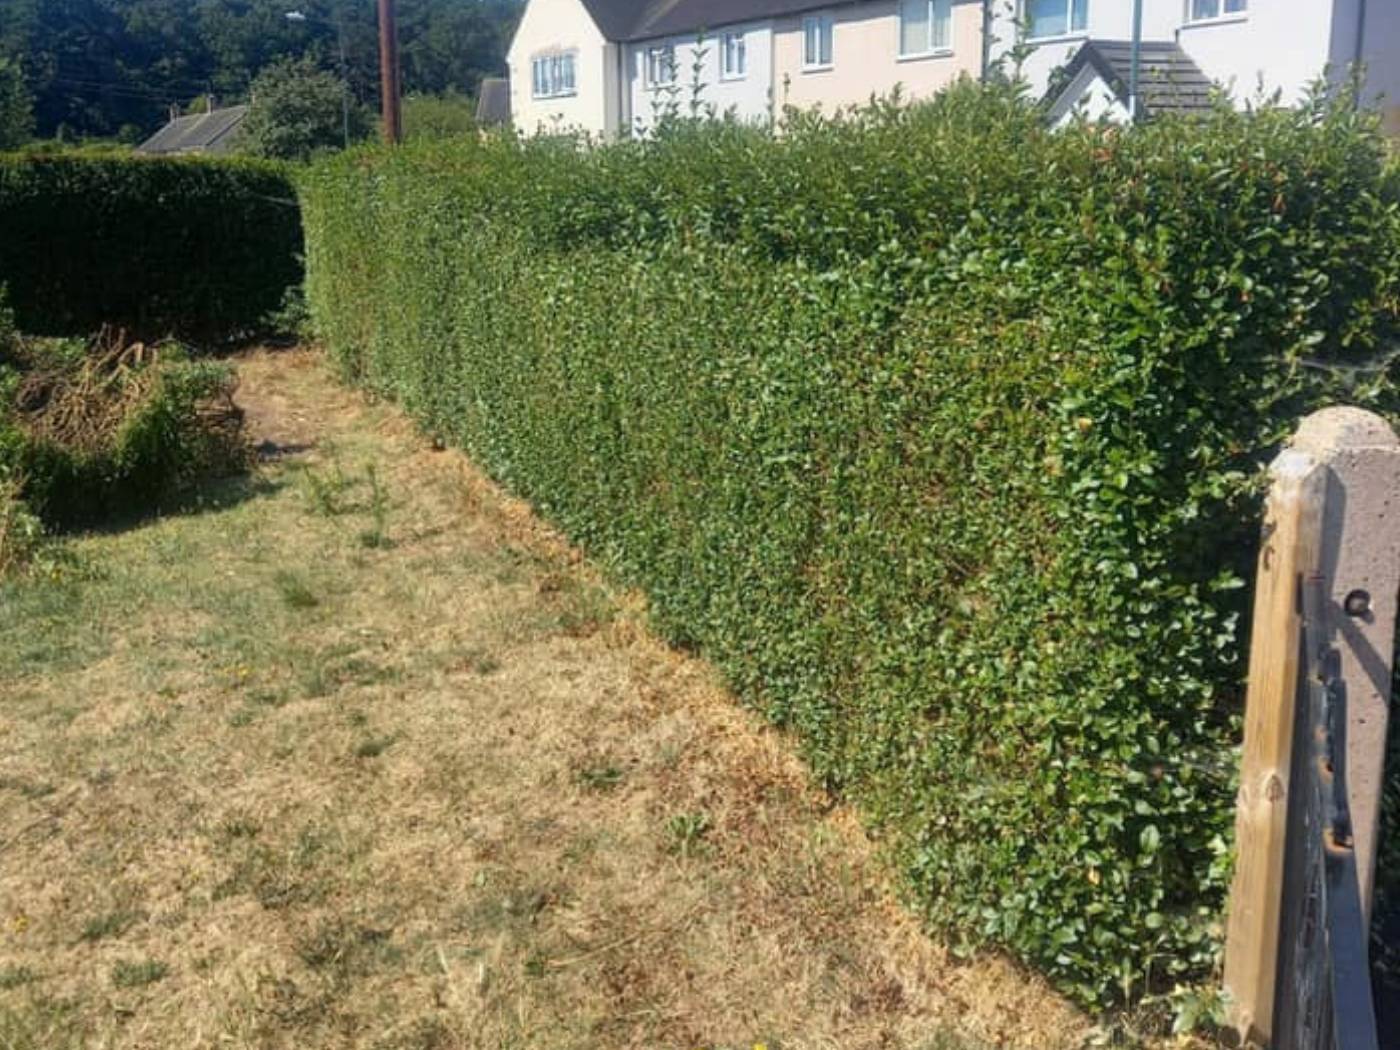 Nottingham Fencing hedge requiring removal